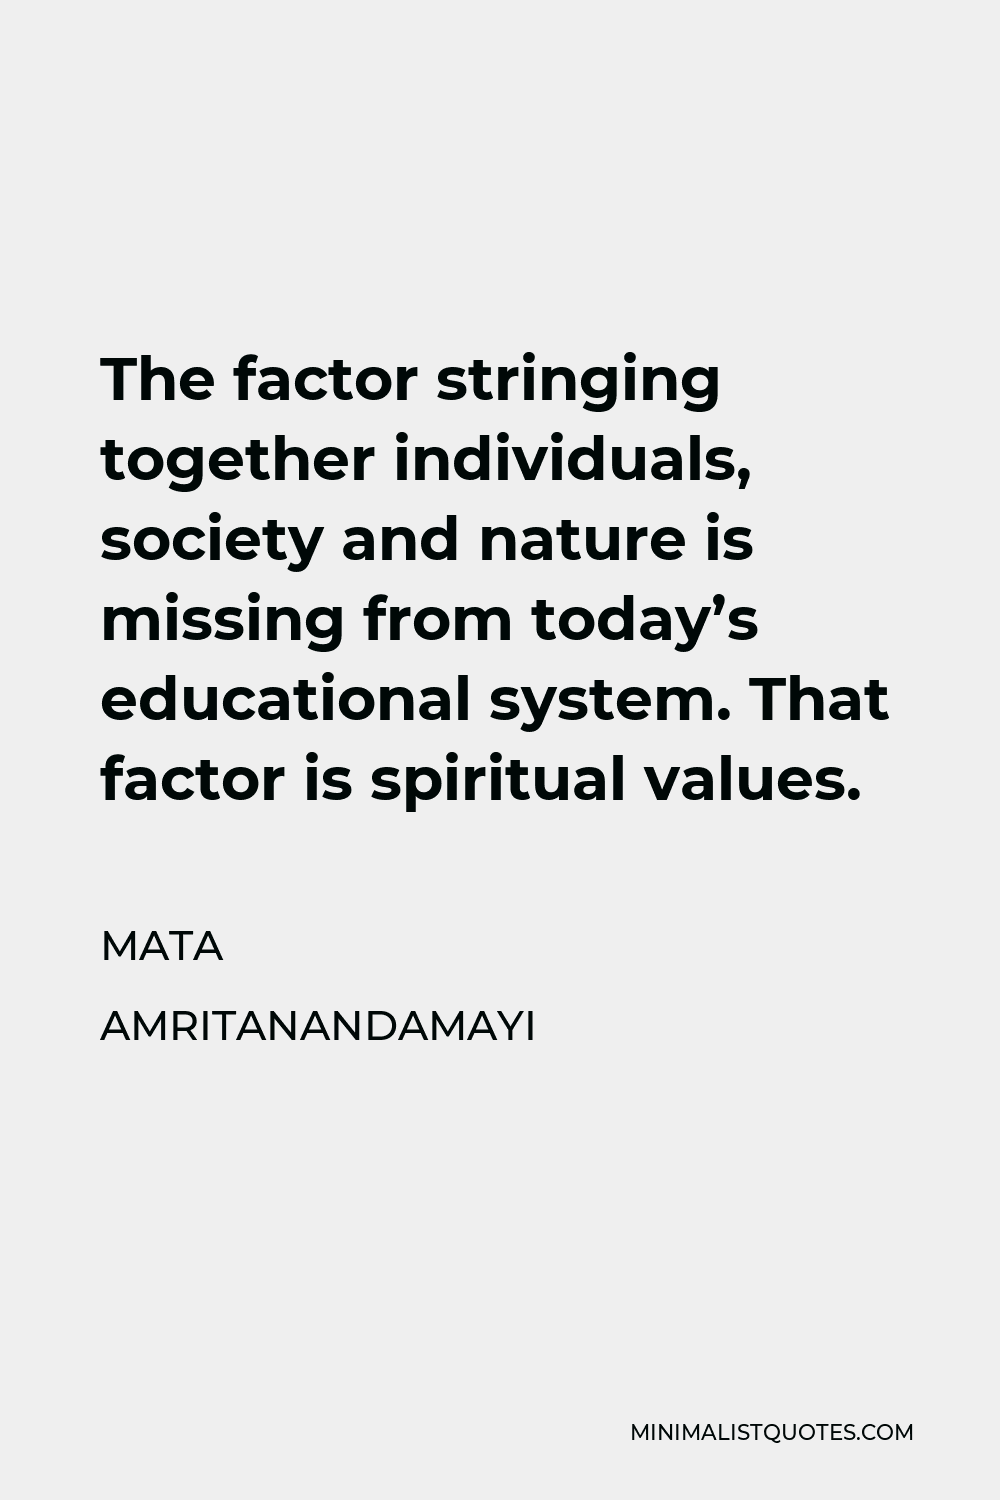 Mata Amritanandamayi Quote - The factor stringing together individuals, society and nature is missing from today’s educational system. That factor is spiritual values.